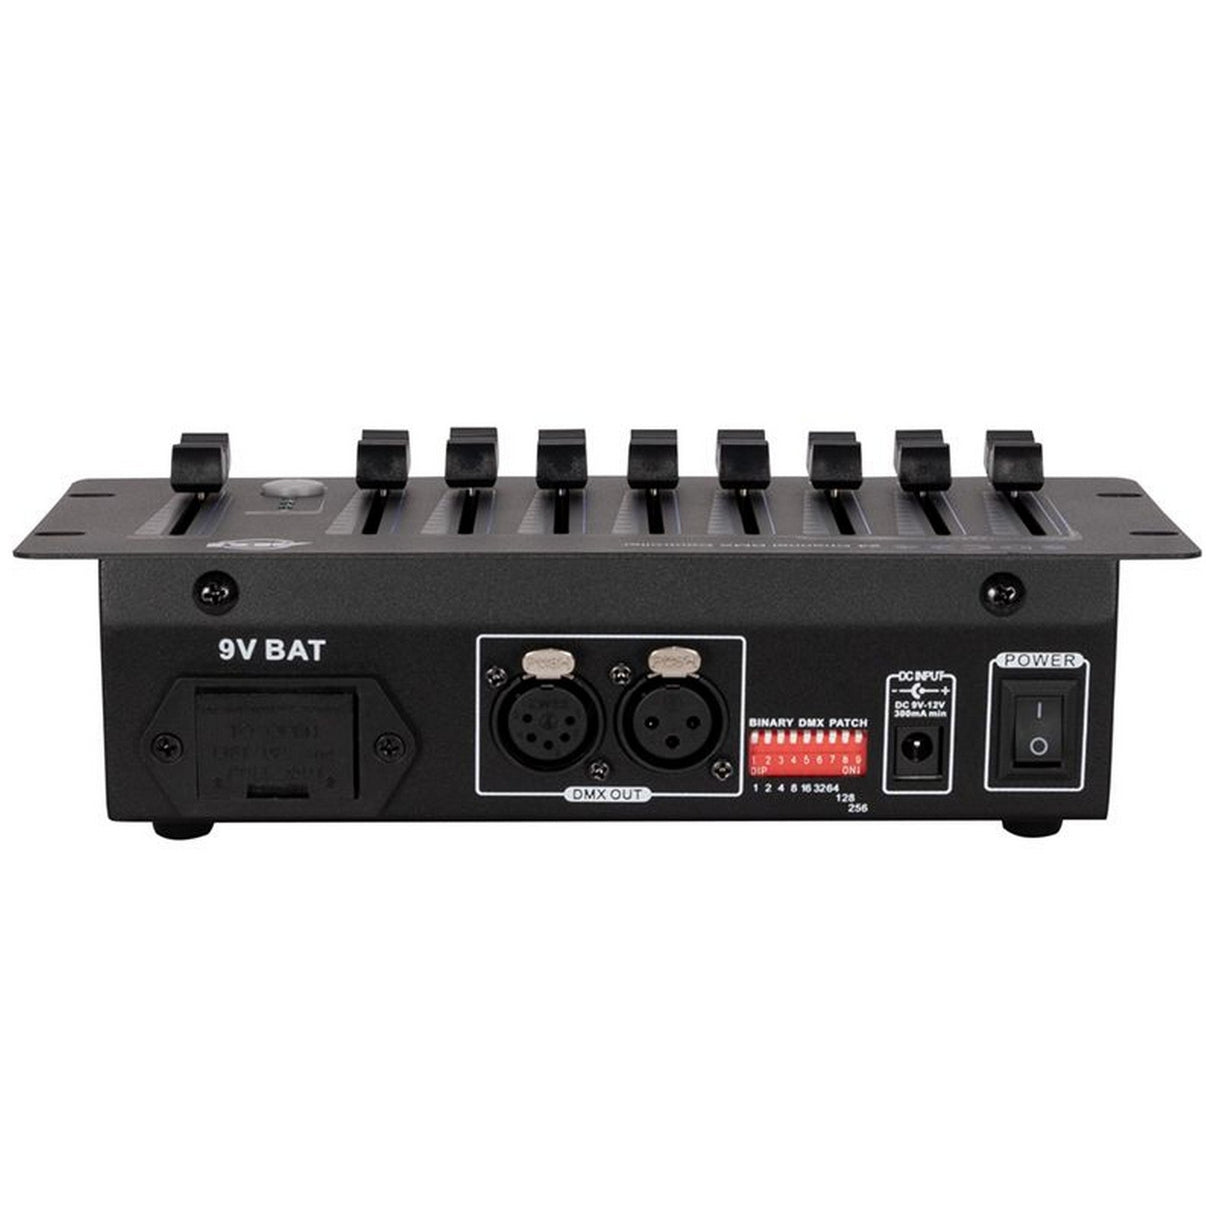 ADJ SDC24 DMX Controller with Wired Digital Communication Network